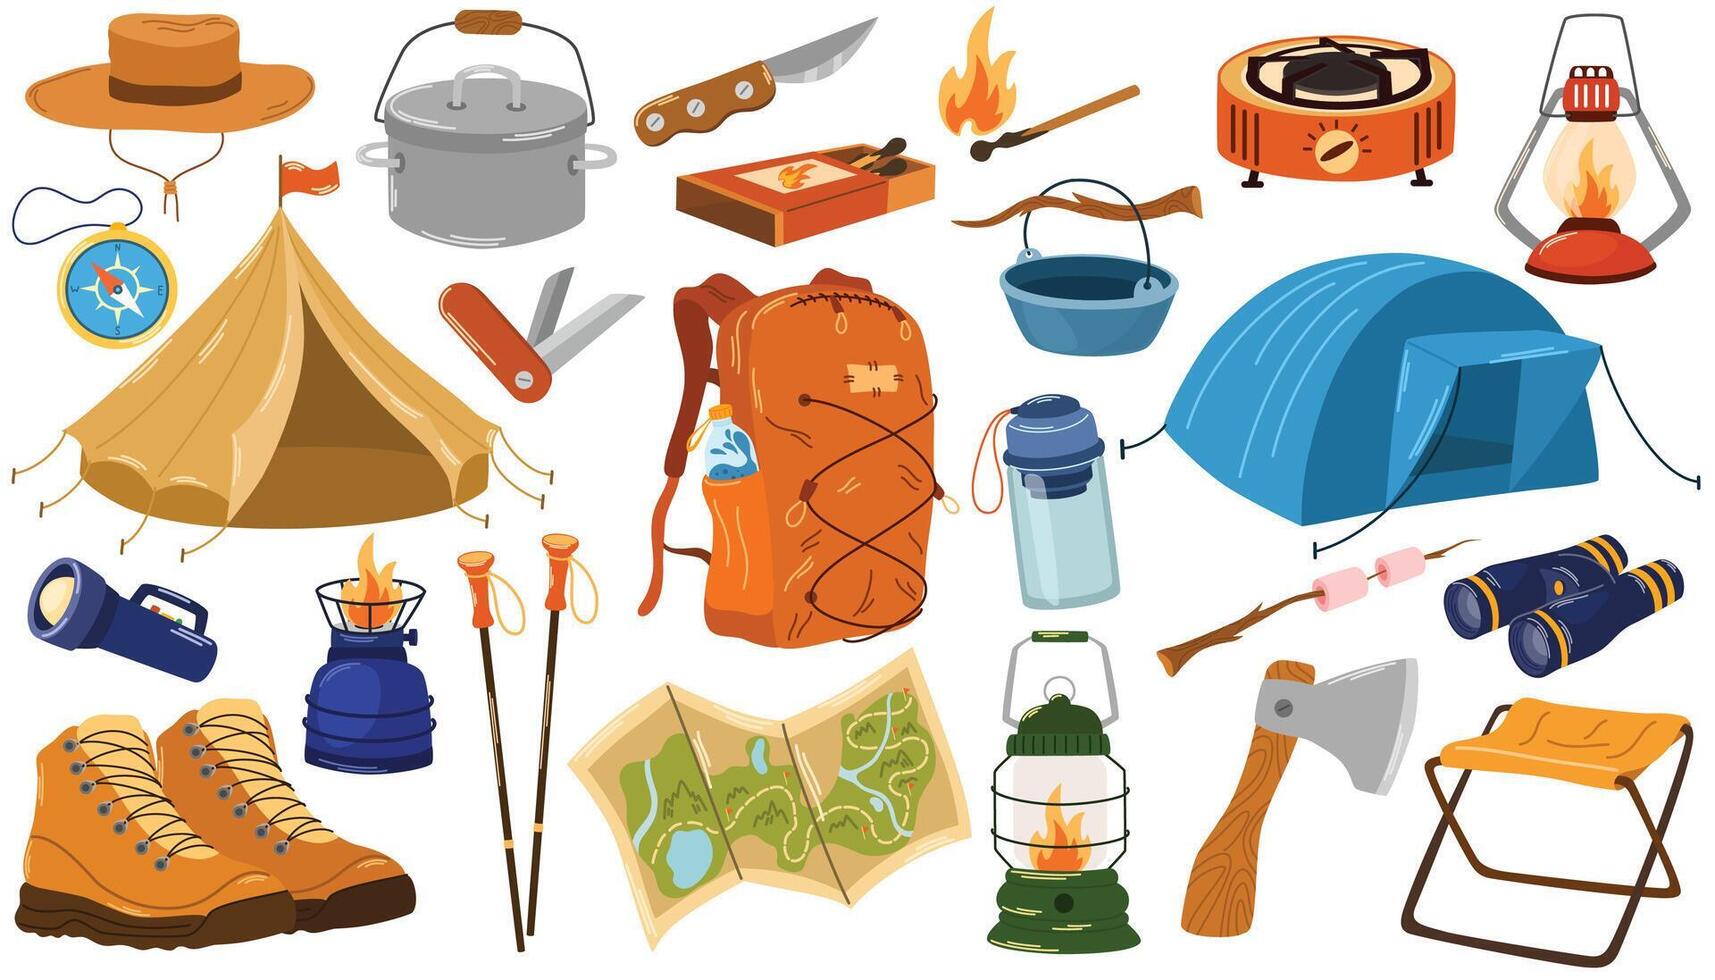 Camping, hiking items set. Tourism and adventure accessories. Summer travel and picnic stuff. Holiday backpack, campfire, hiking shoes, tents, lanterns, burners, axe, map, knives. Vector illustration